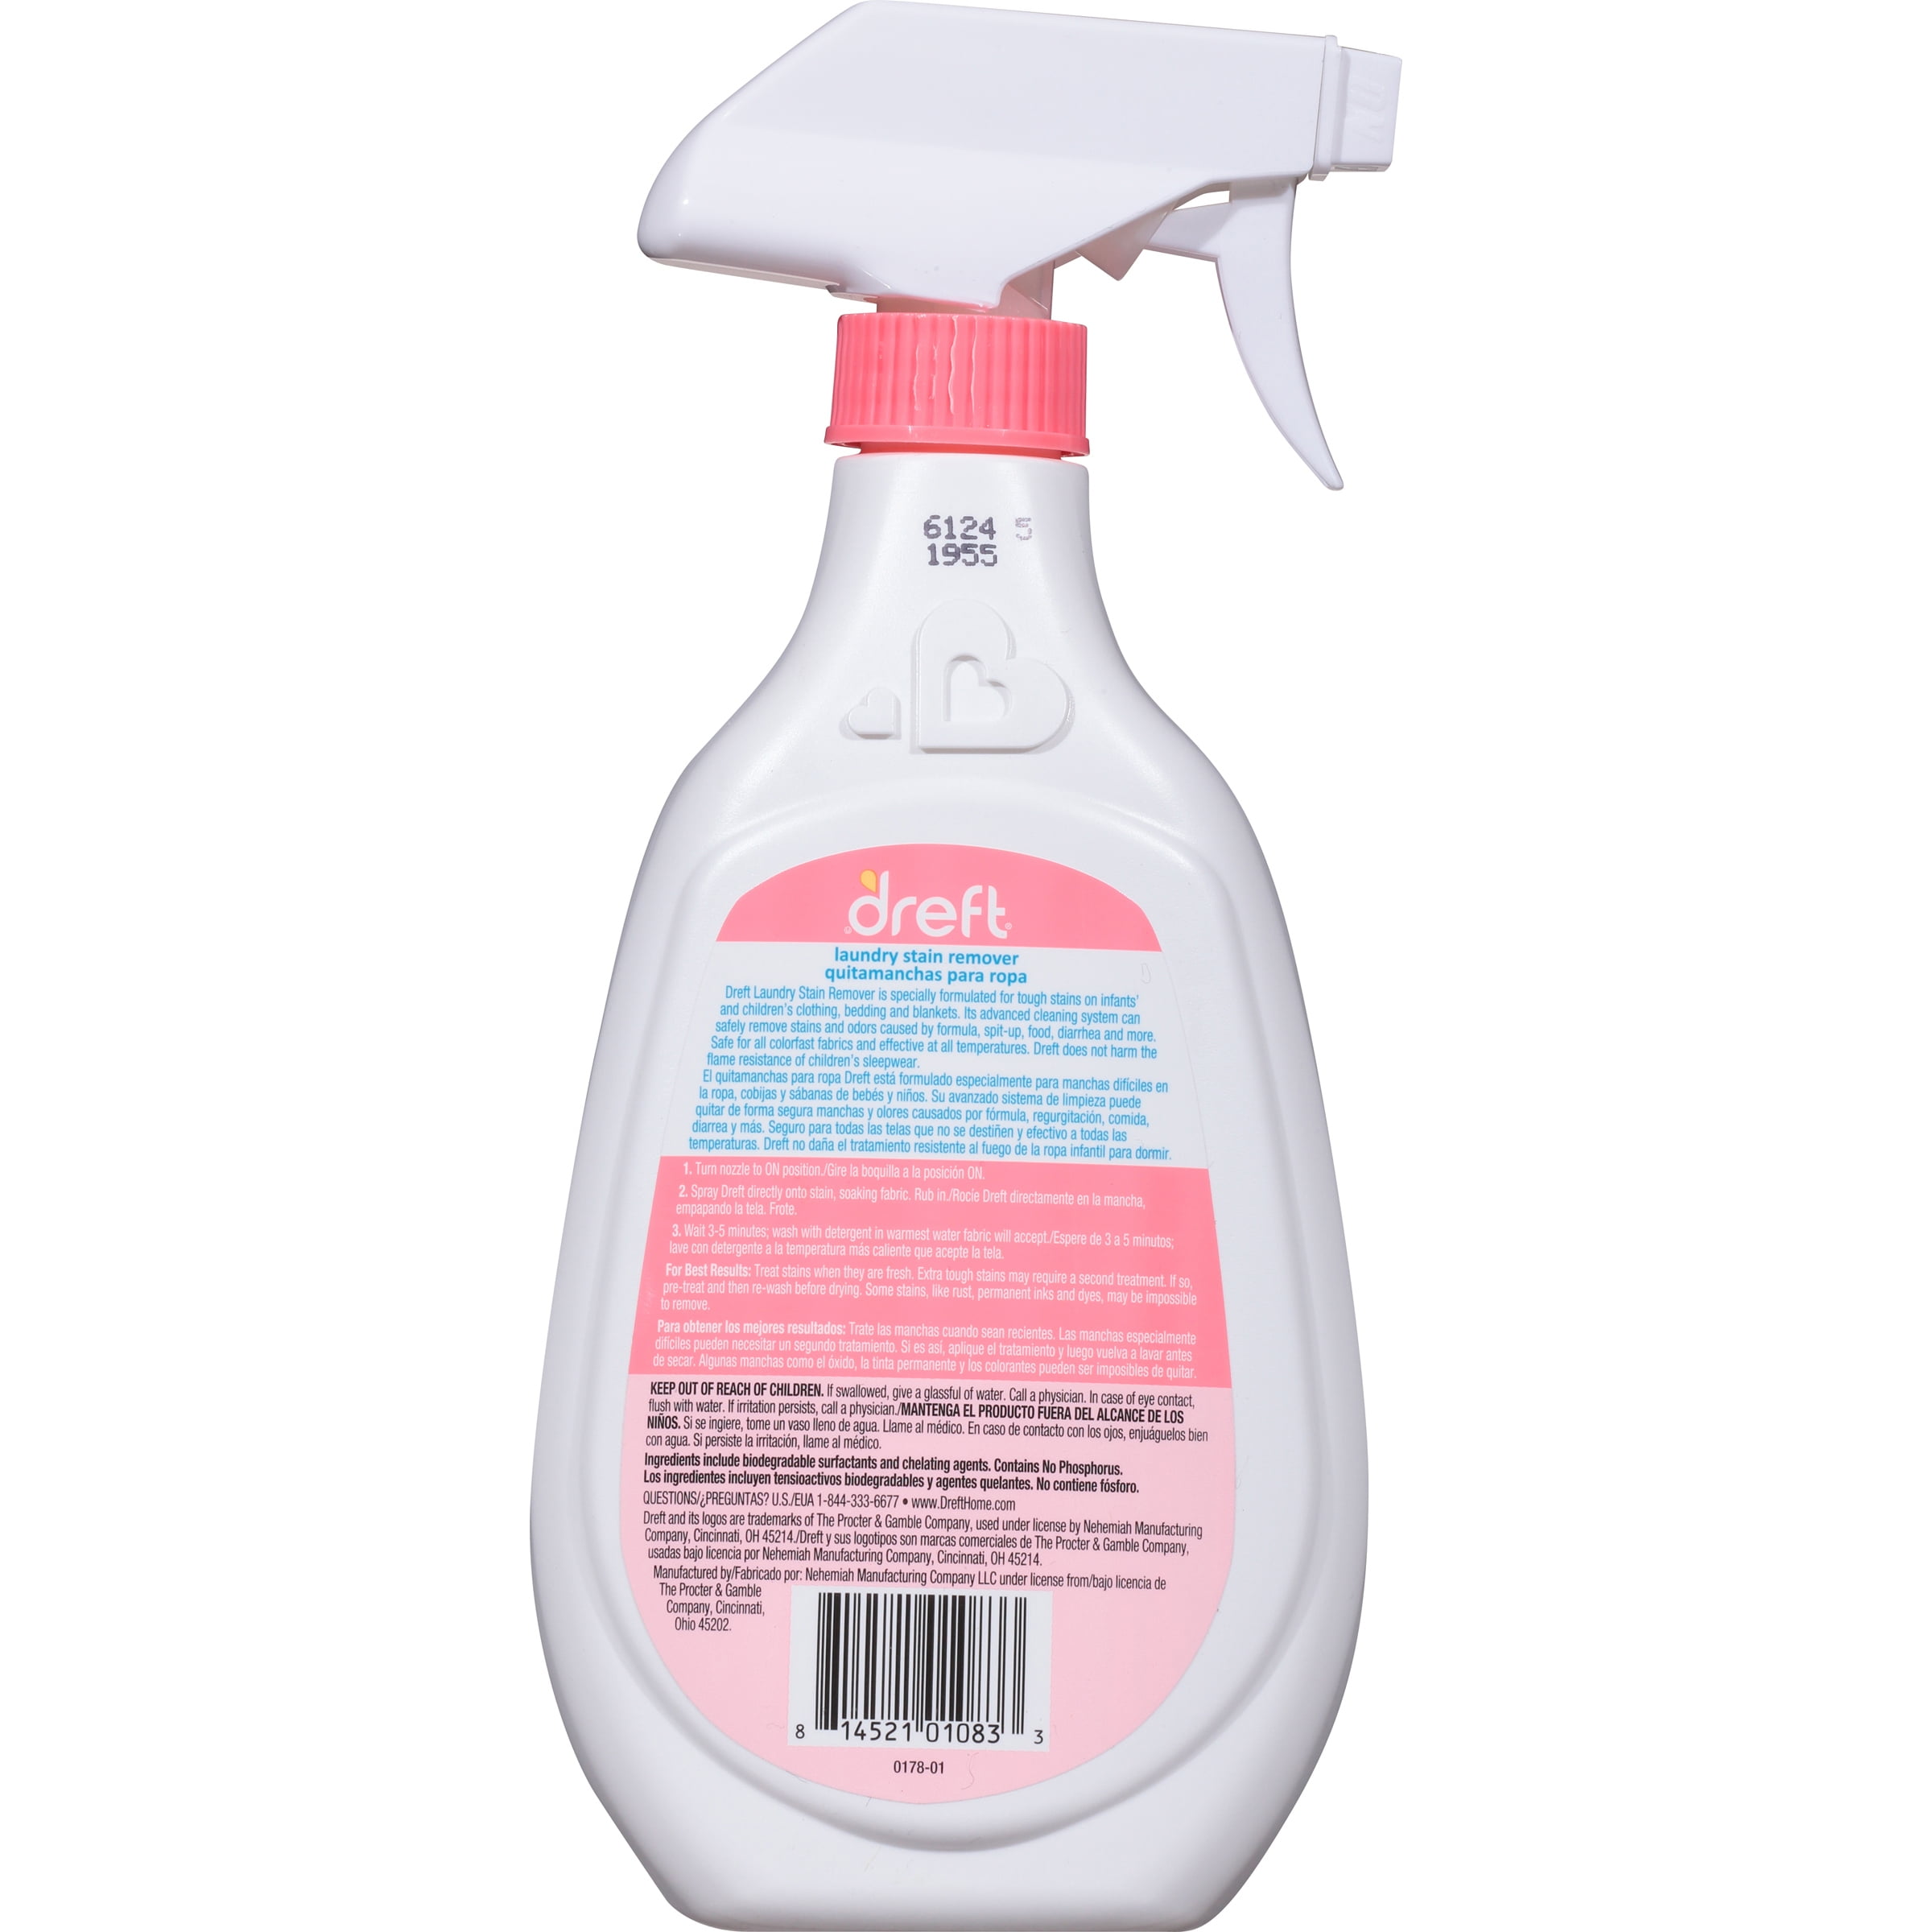 Dreft Stain Remover Spray, Just $0.77 at Target - The Krazy Coupon